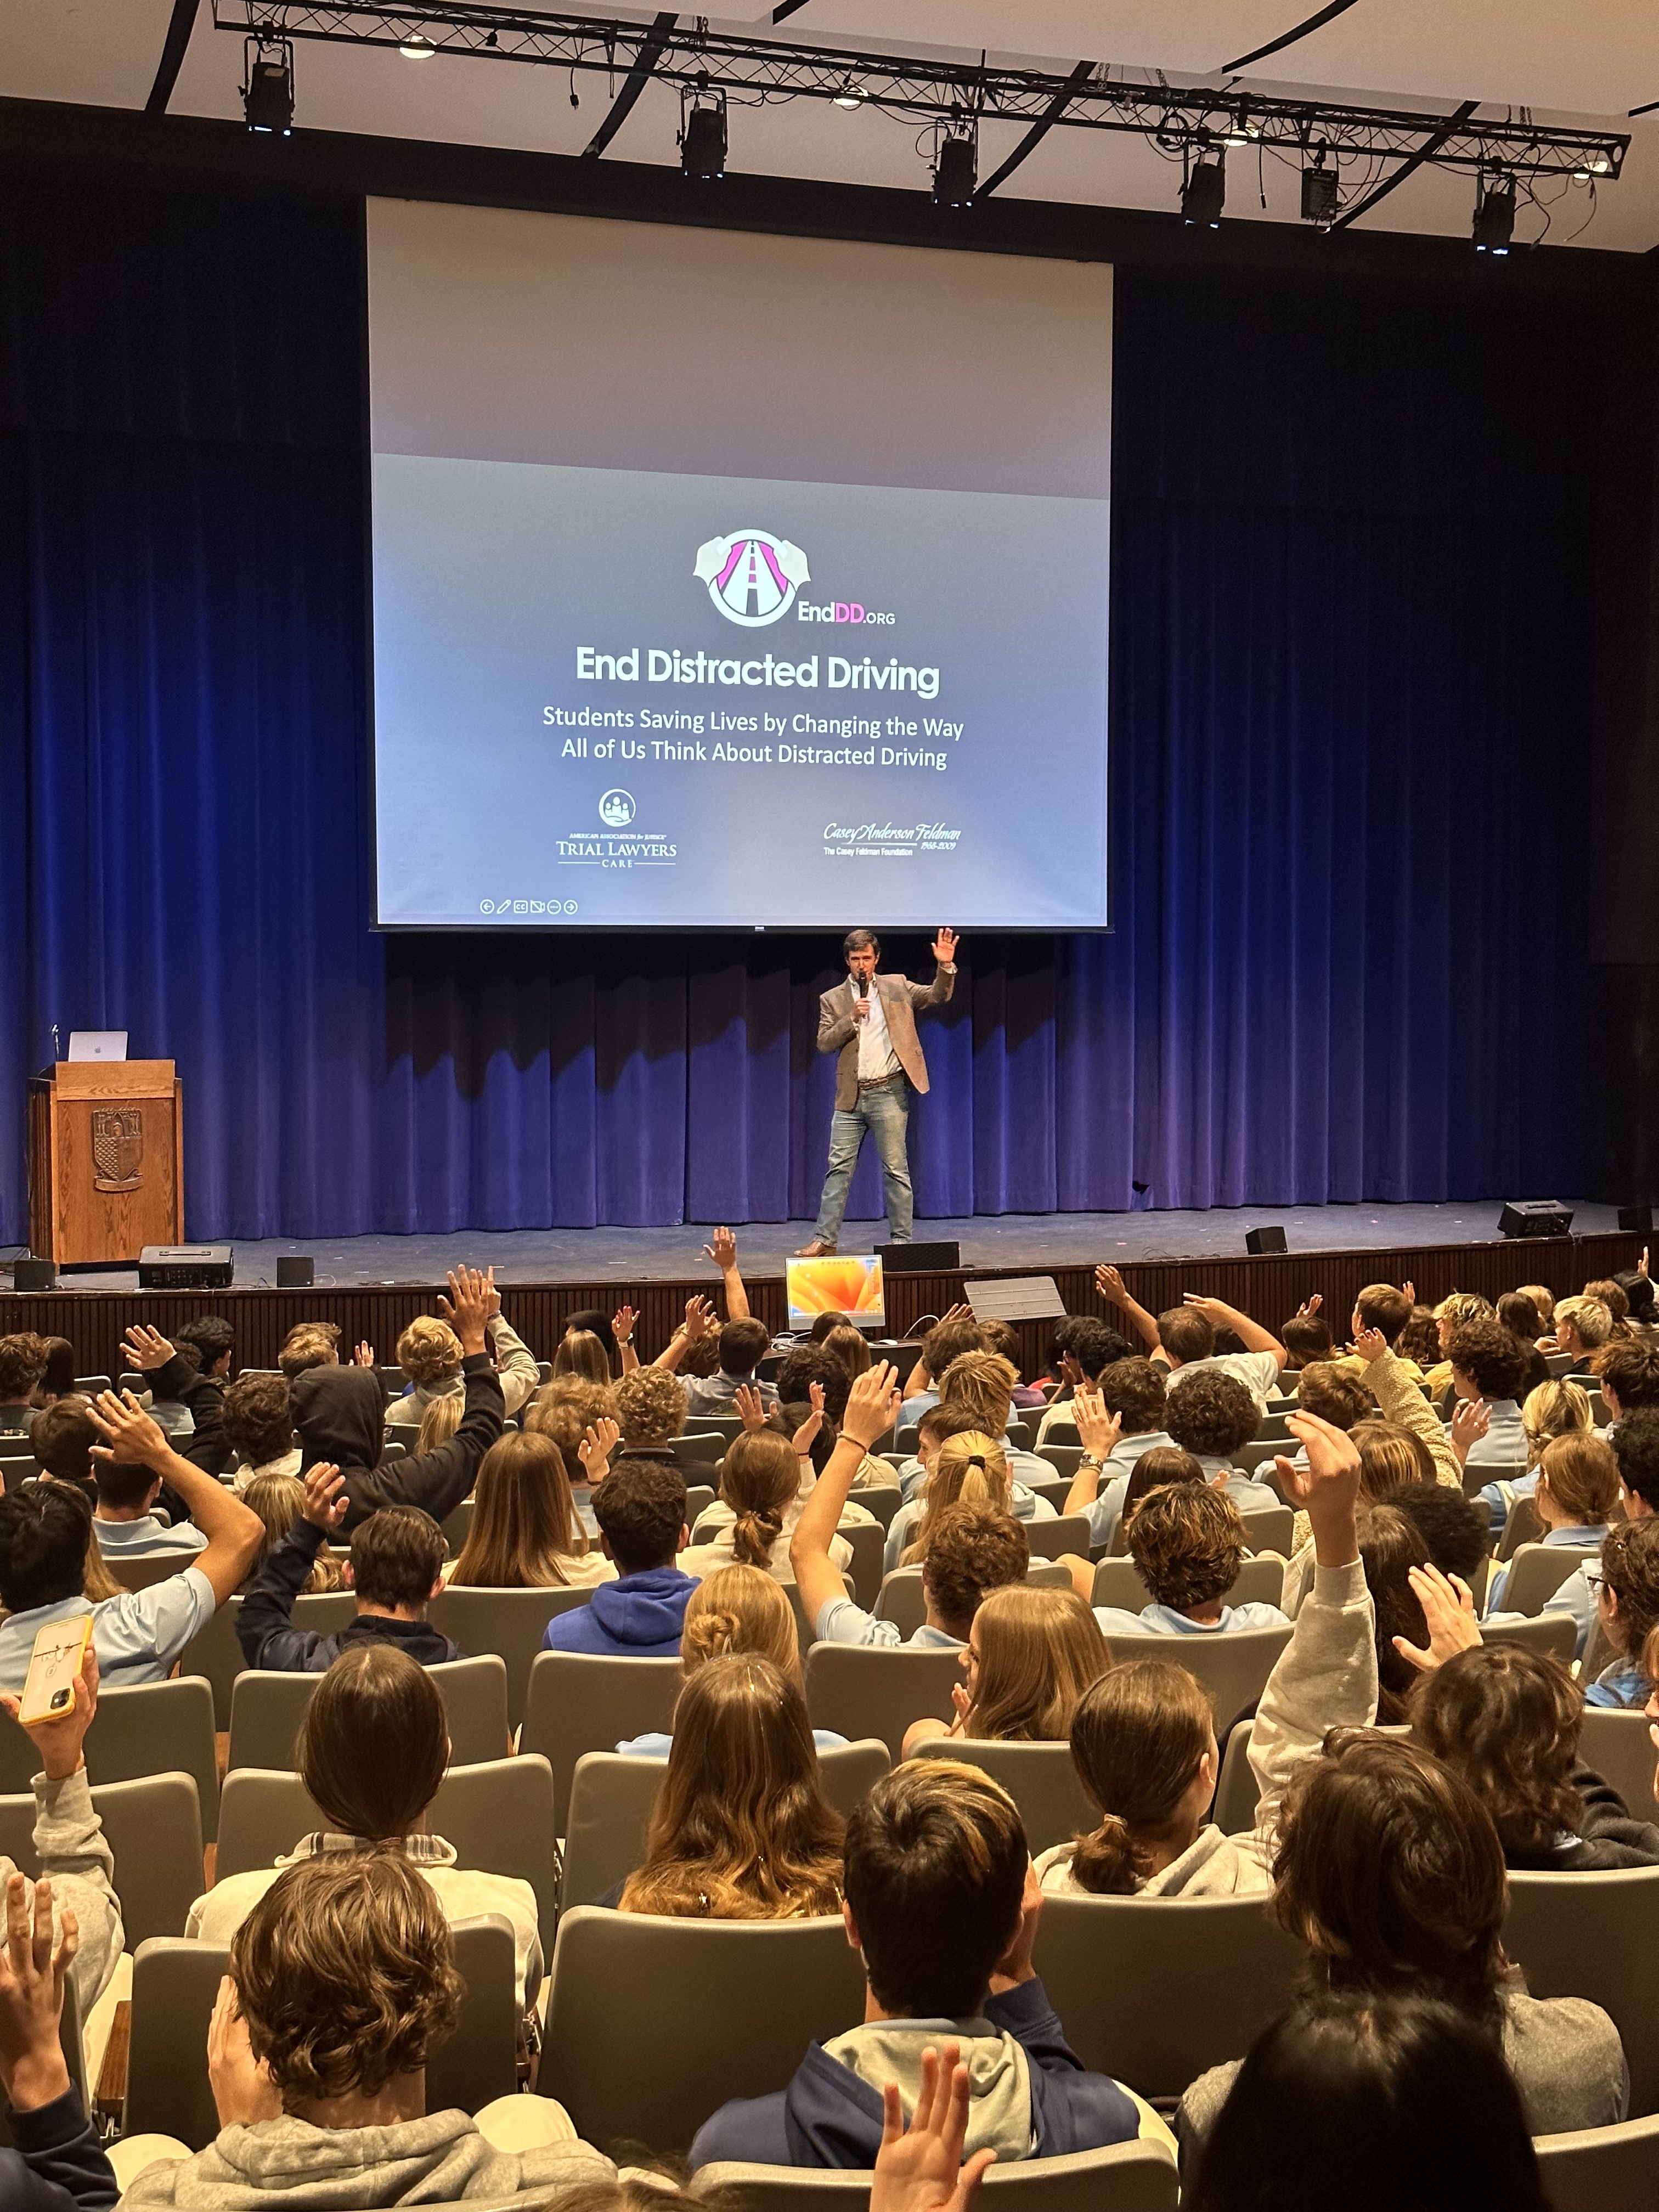 A photo of a man standing on an auditorium stage speaking to room of school age children who are seated and looking at the stage